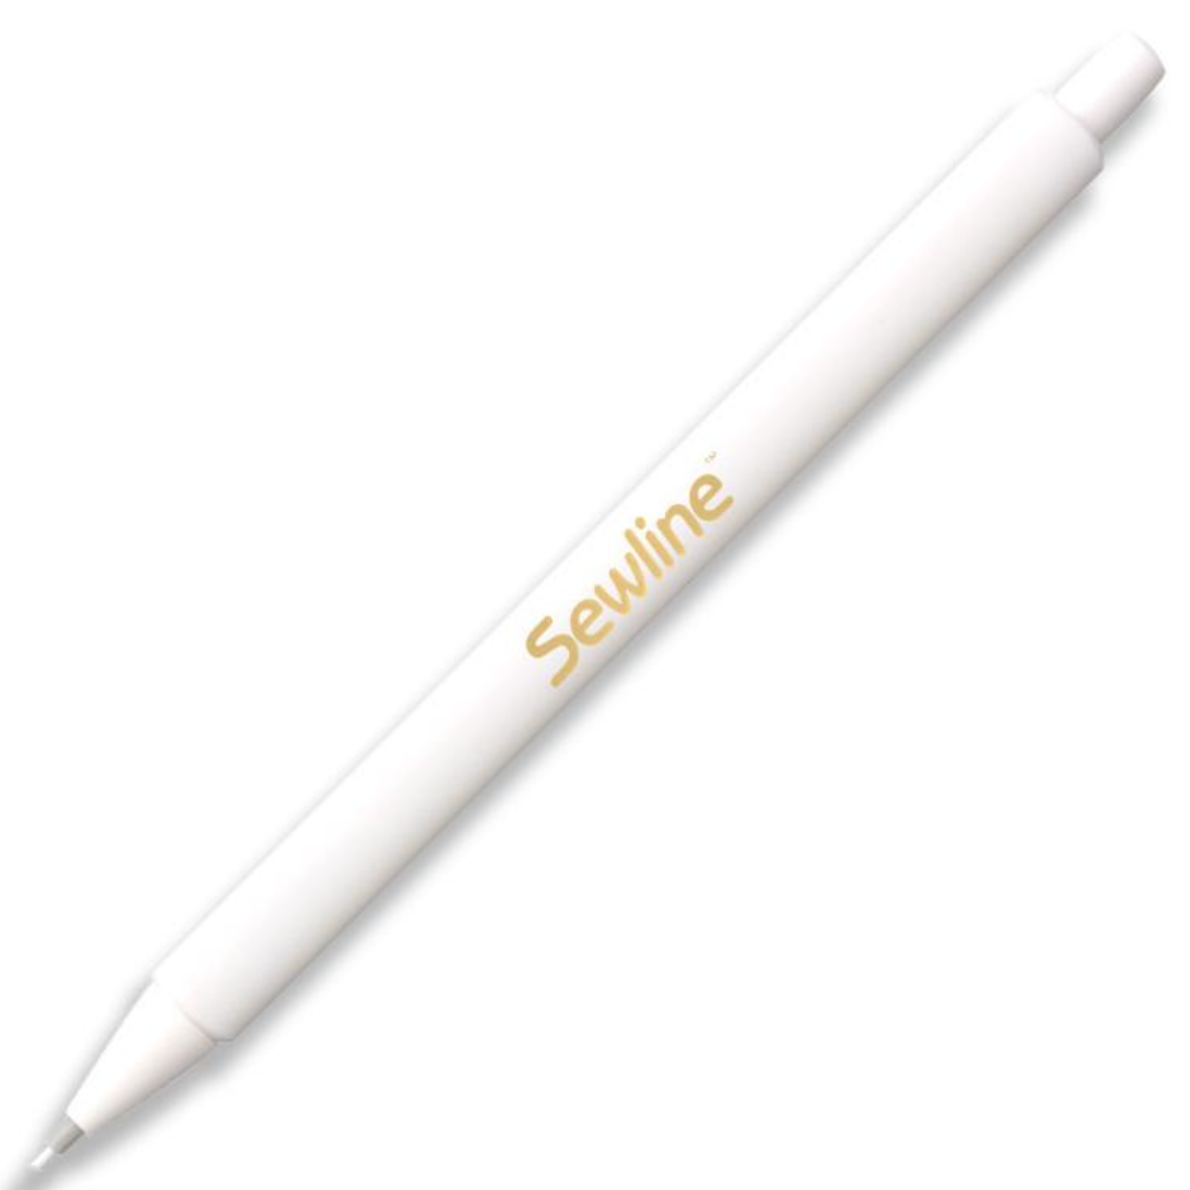 Fabric Pencil by Sewline